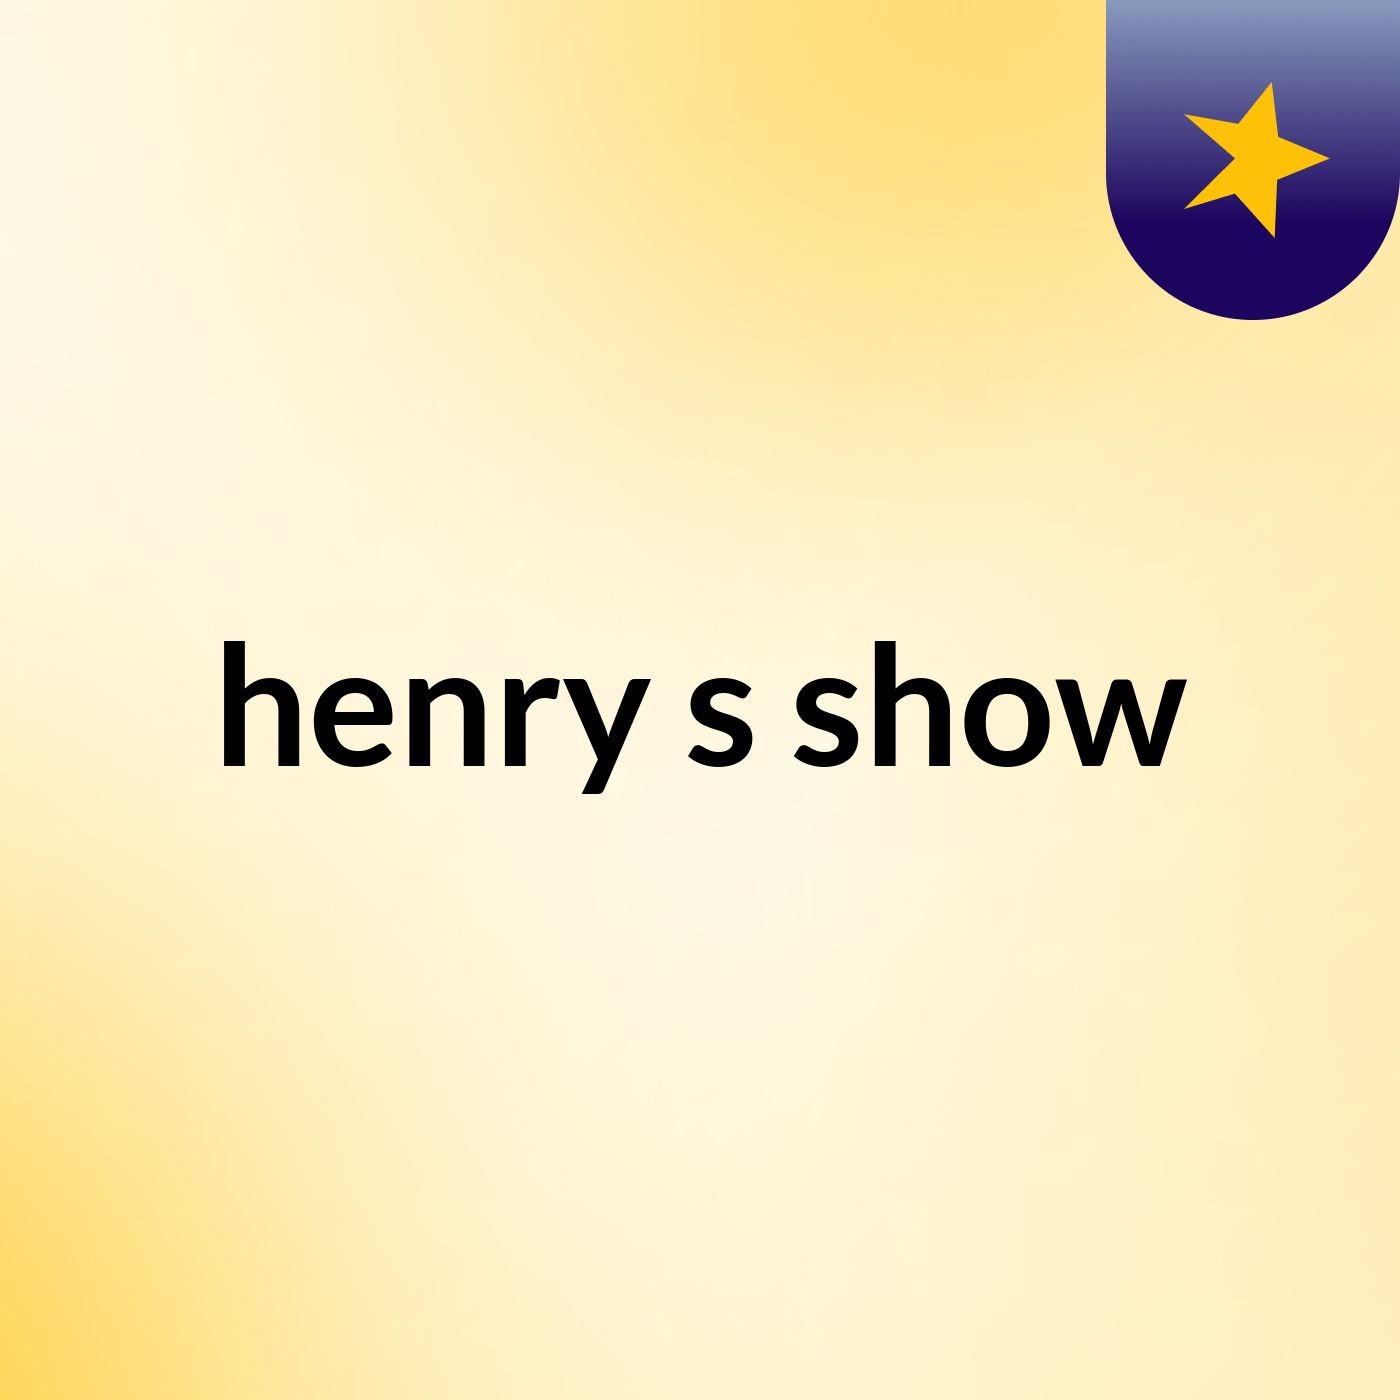 henry's show